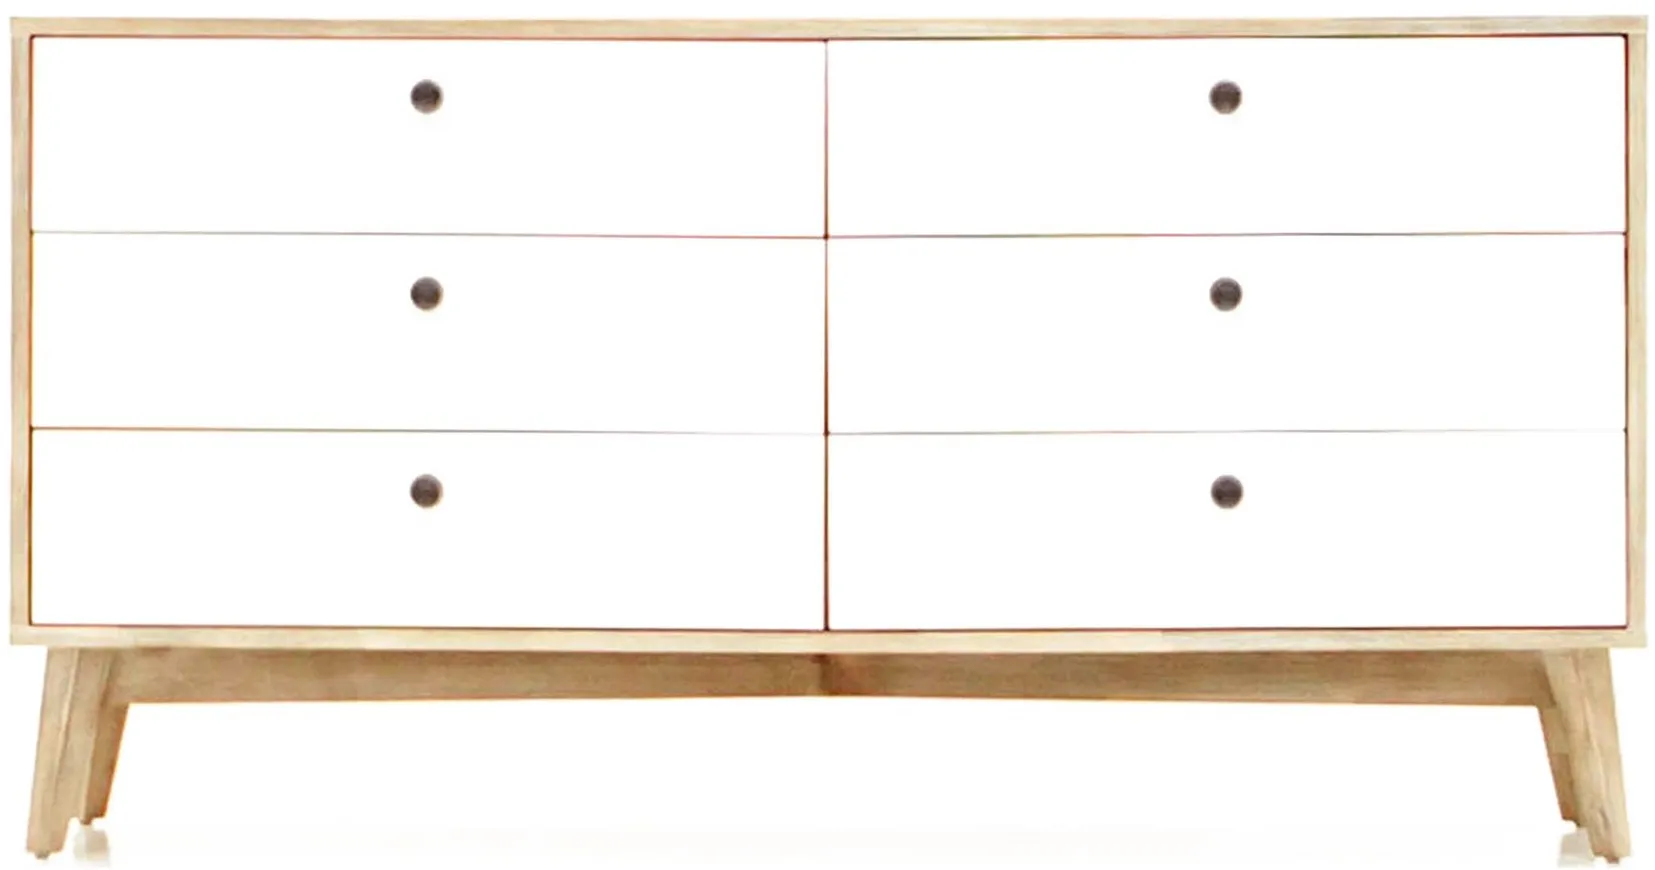 Ava Dresser in White stained and Natural brushed by LH Imports Ltd